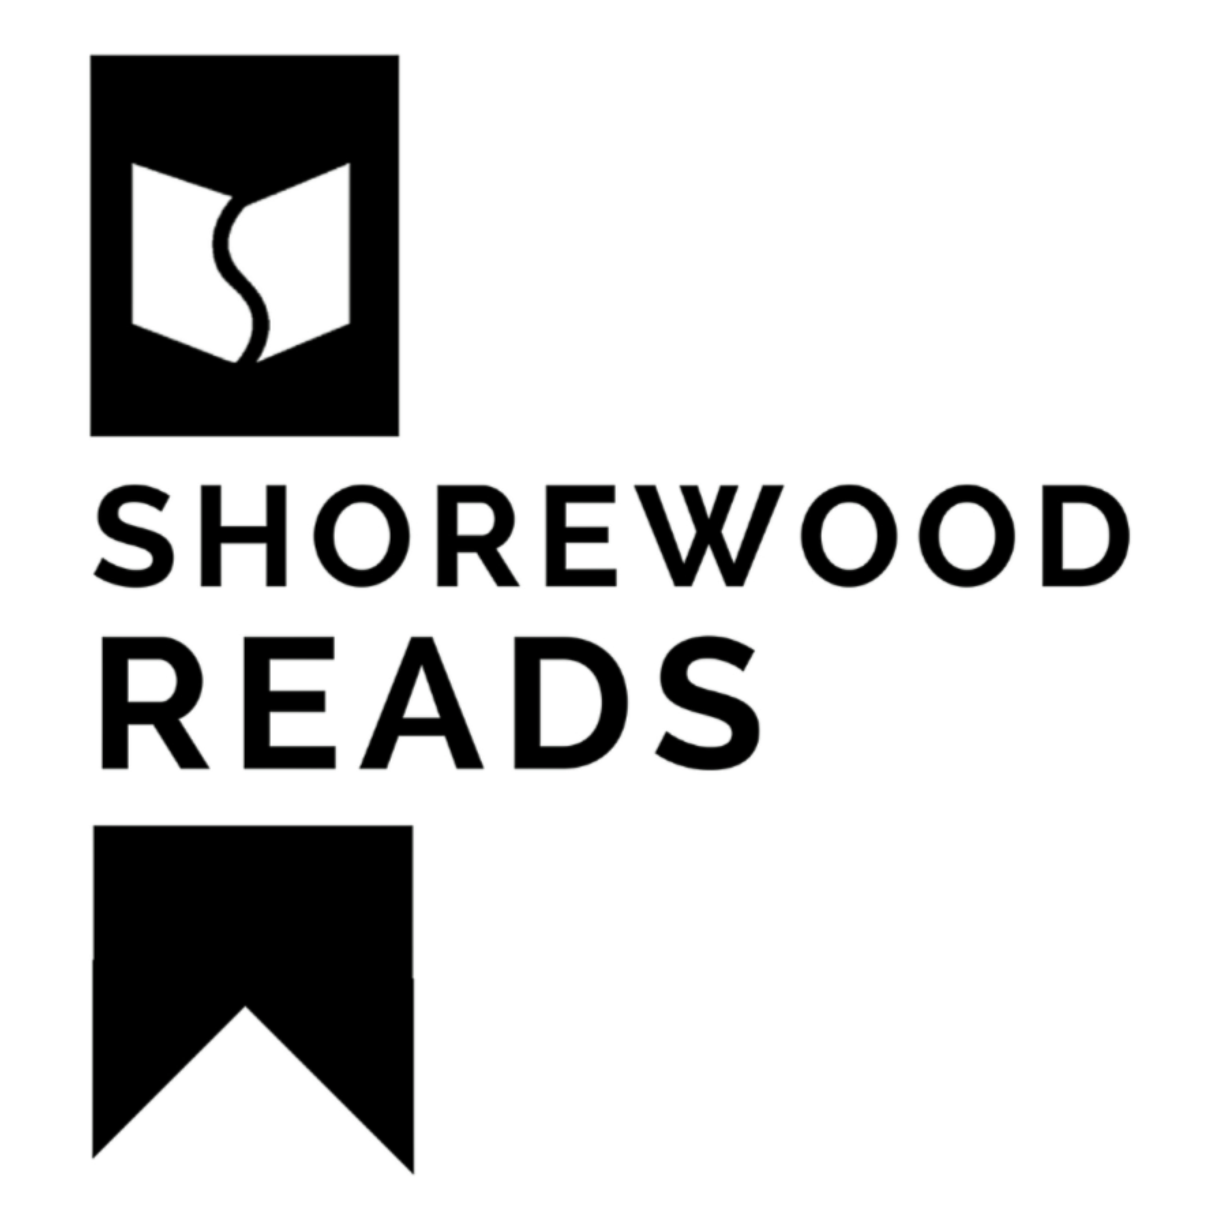 Reads: Shorewood Reads